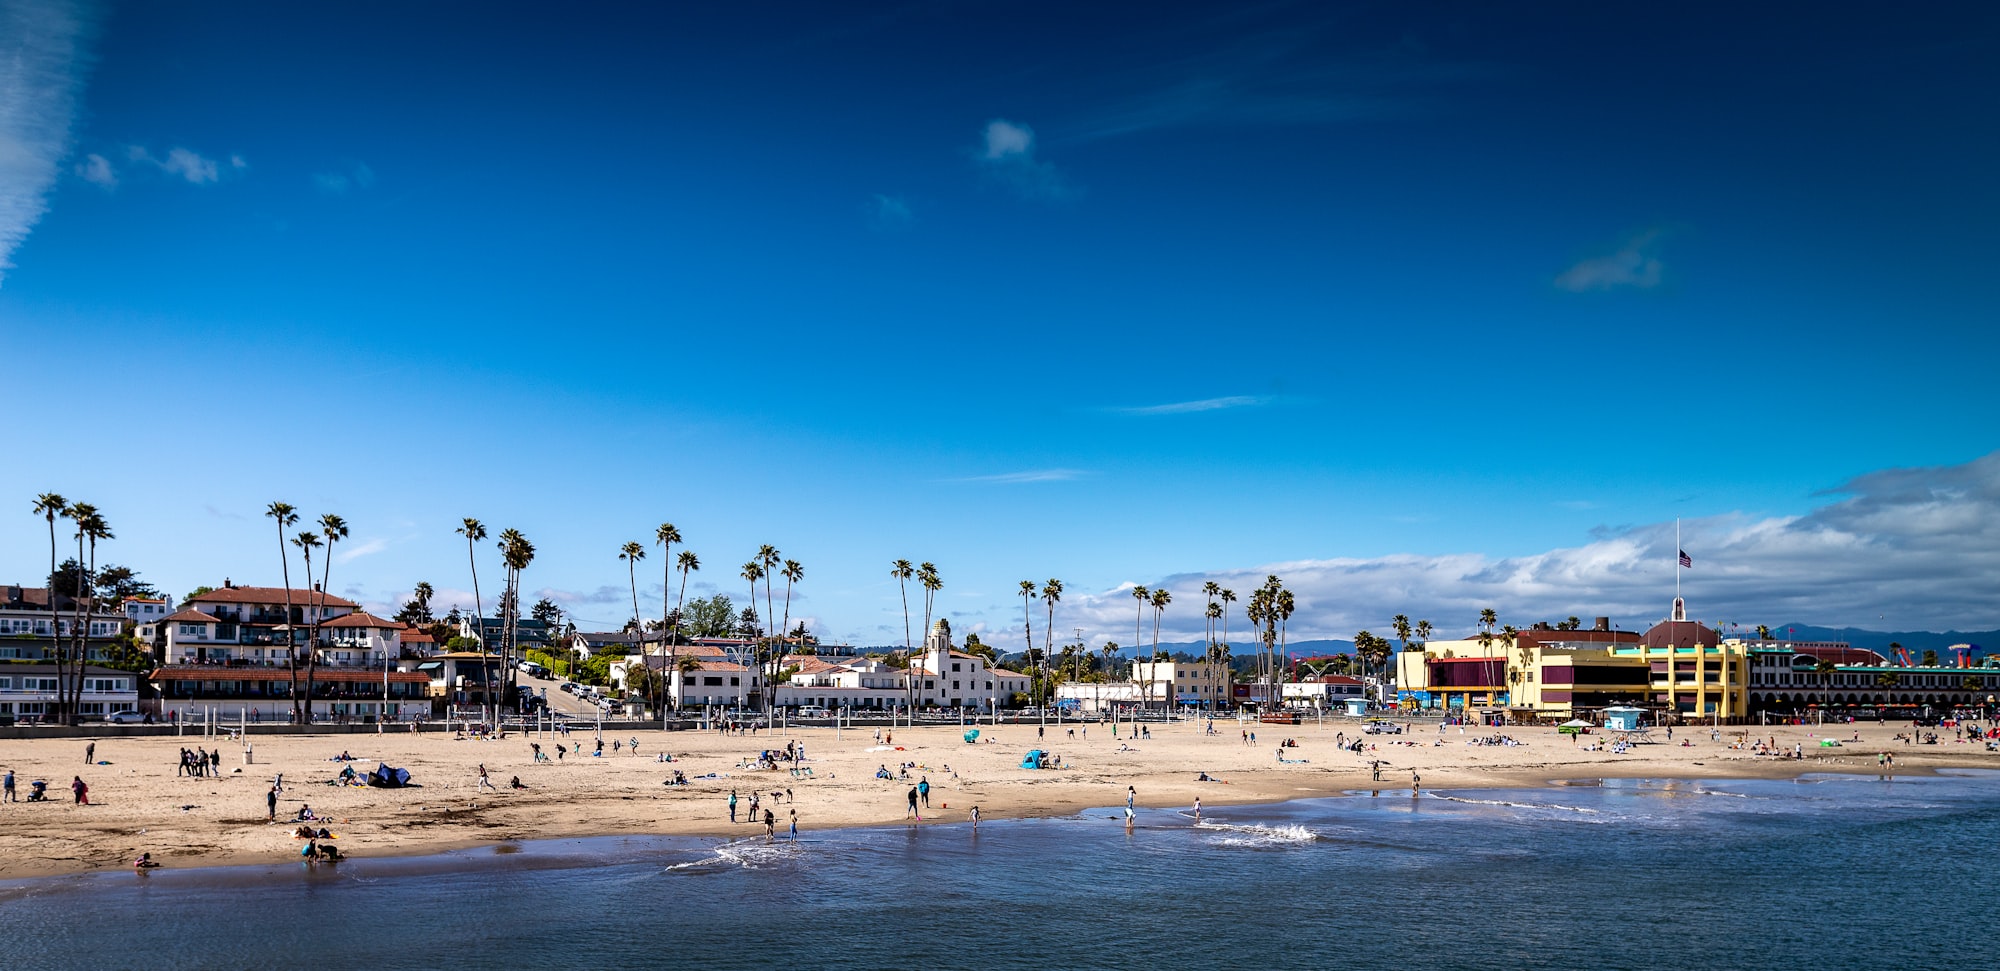 The Best Places to Visit in California